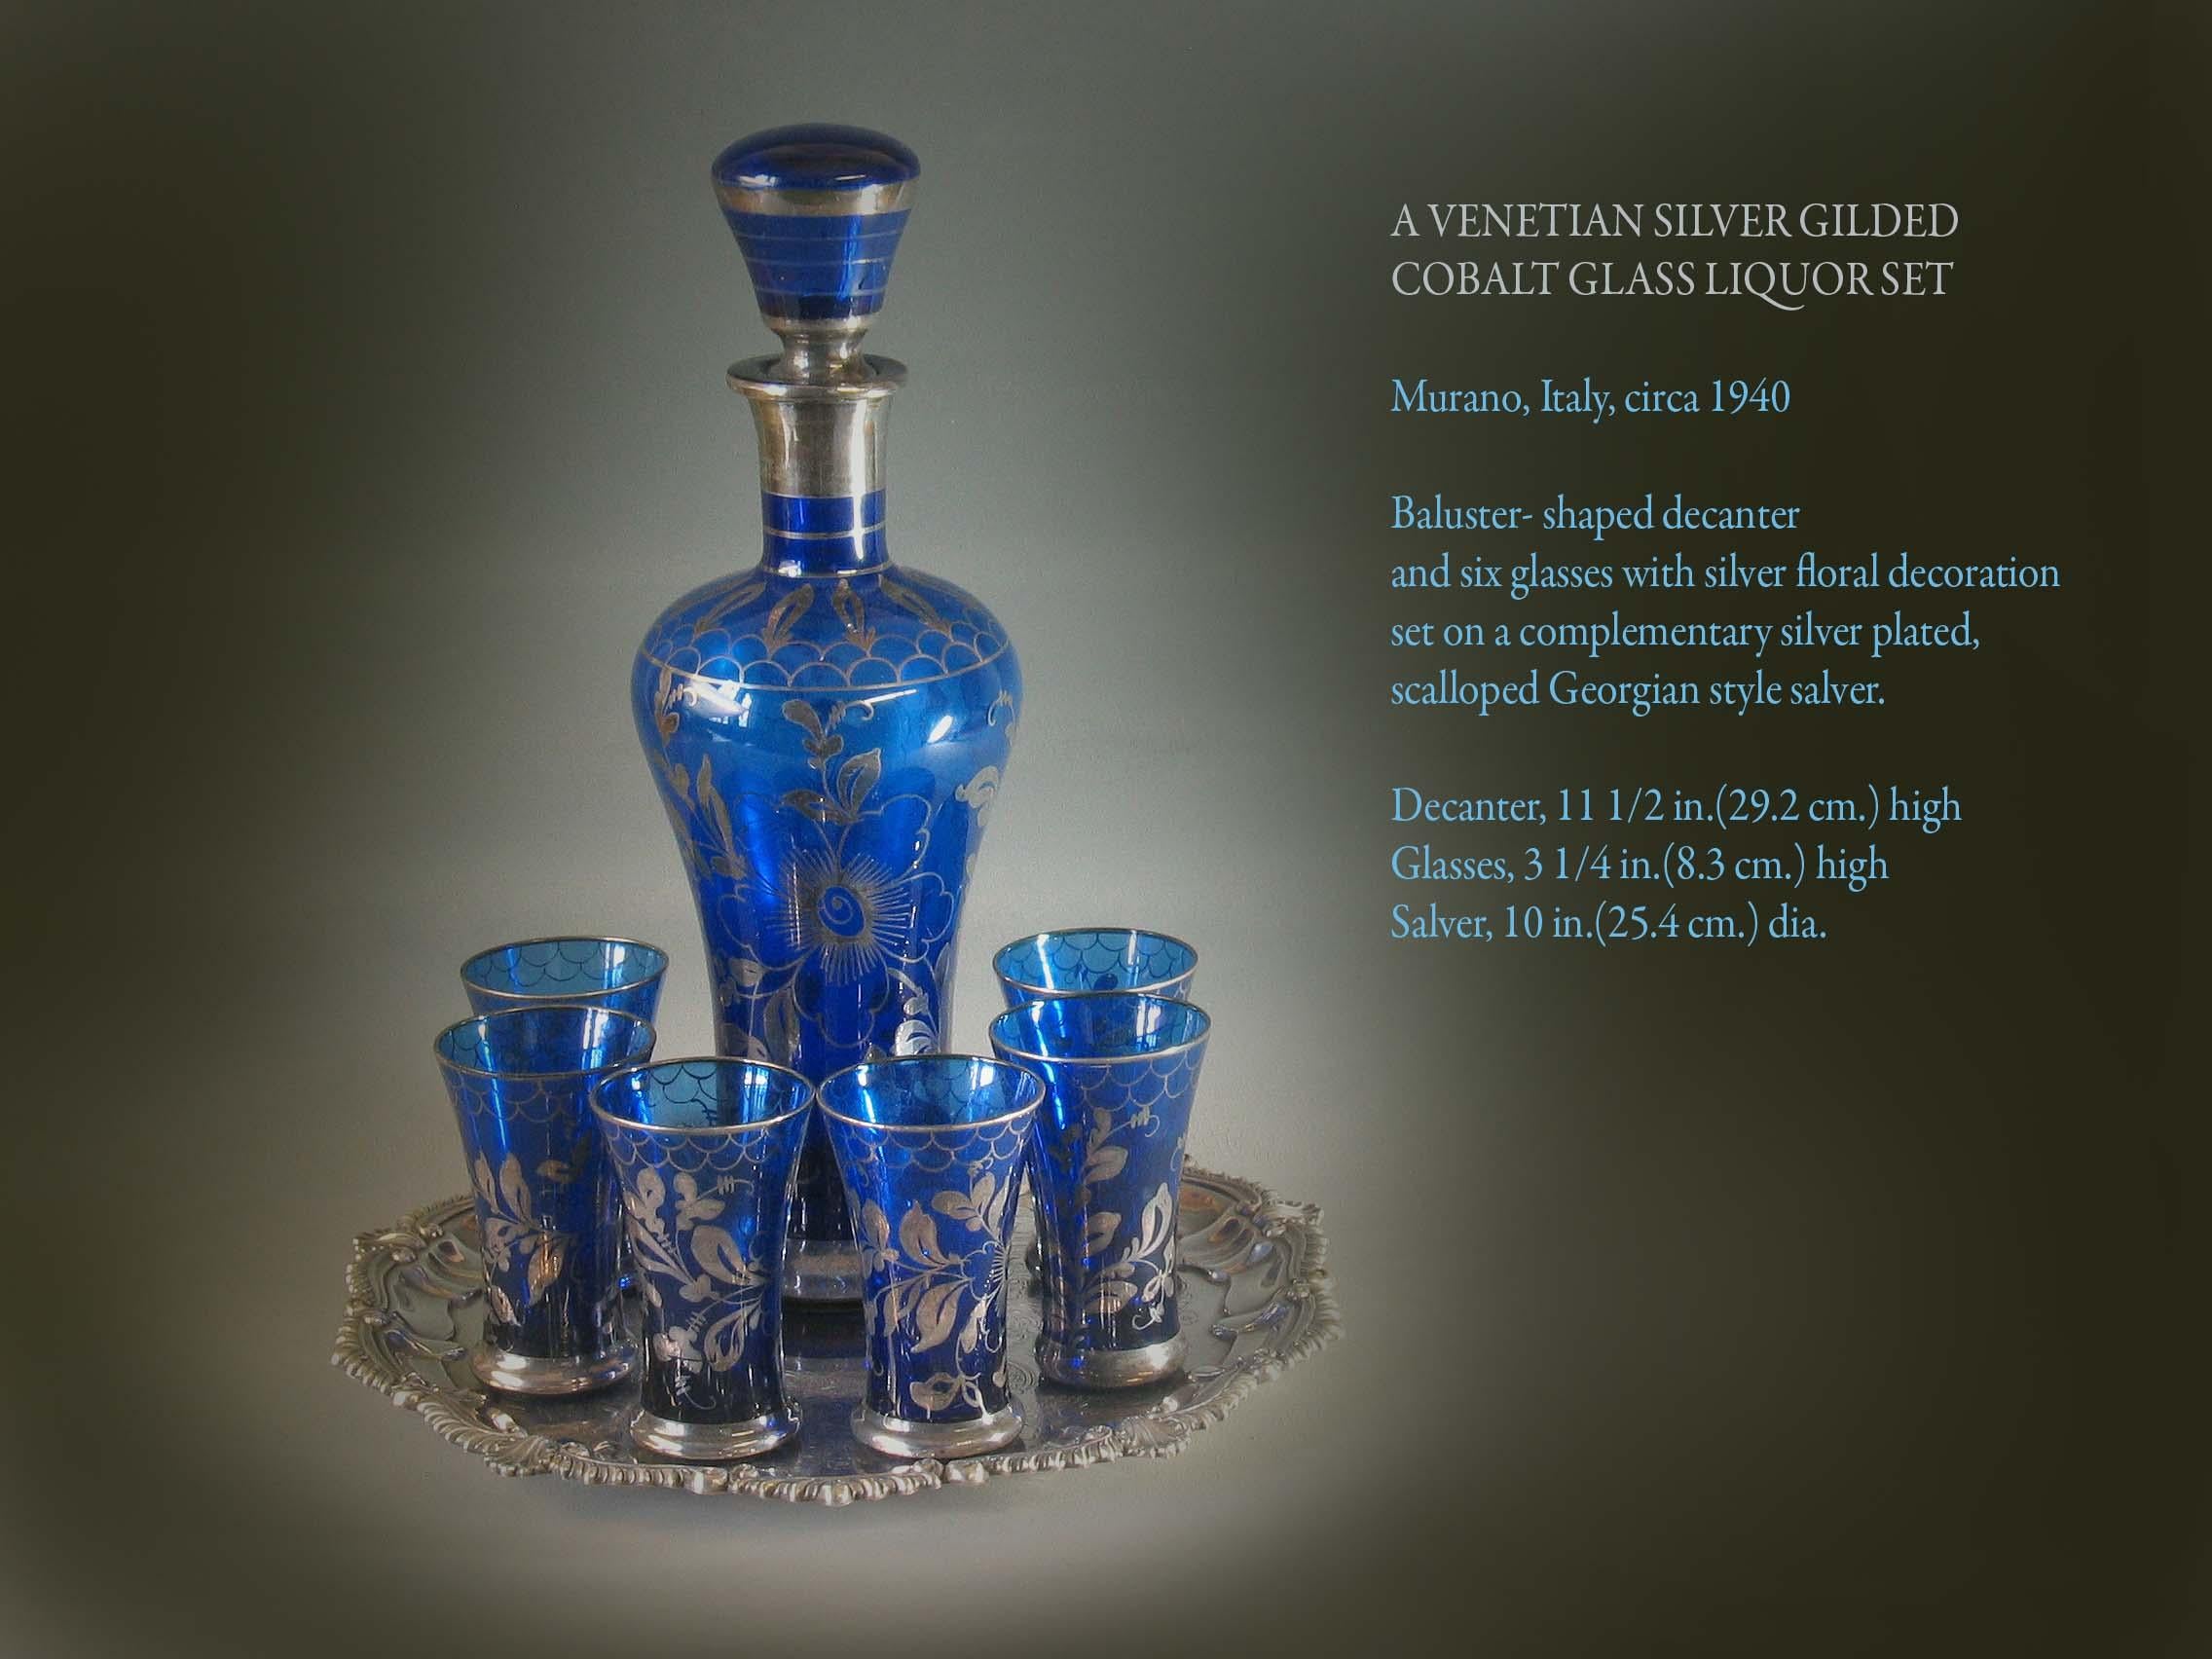 A Venetian silver gilded cobalt glass liquor set

Murano, Italy, circa 1940.

Baluster- shaped decanter
and six glasses with silver floral decoration
set on a complementary silver plated, 
scalloped Georgian style salver.

Measures: